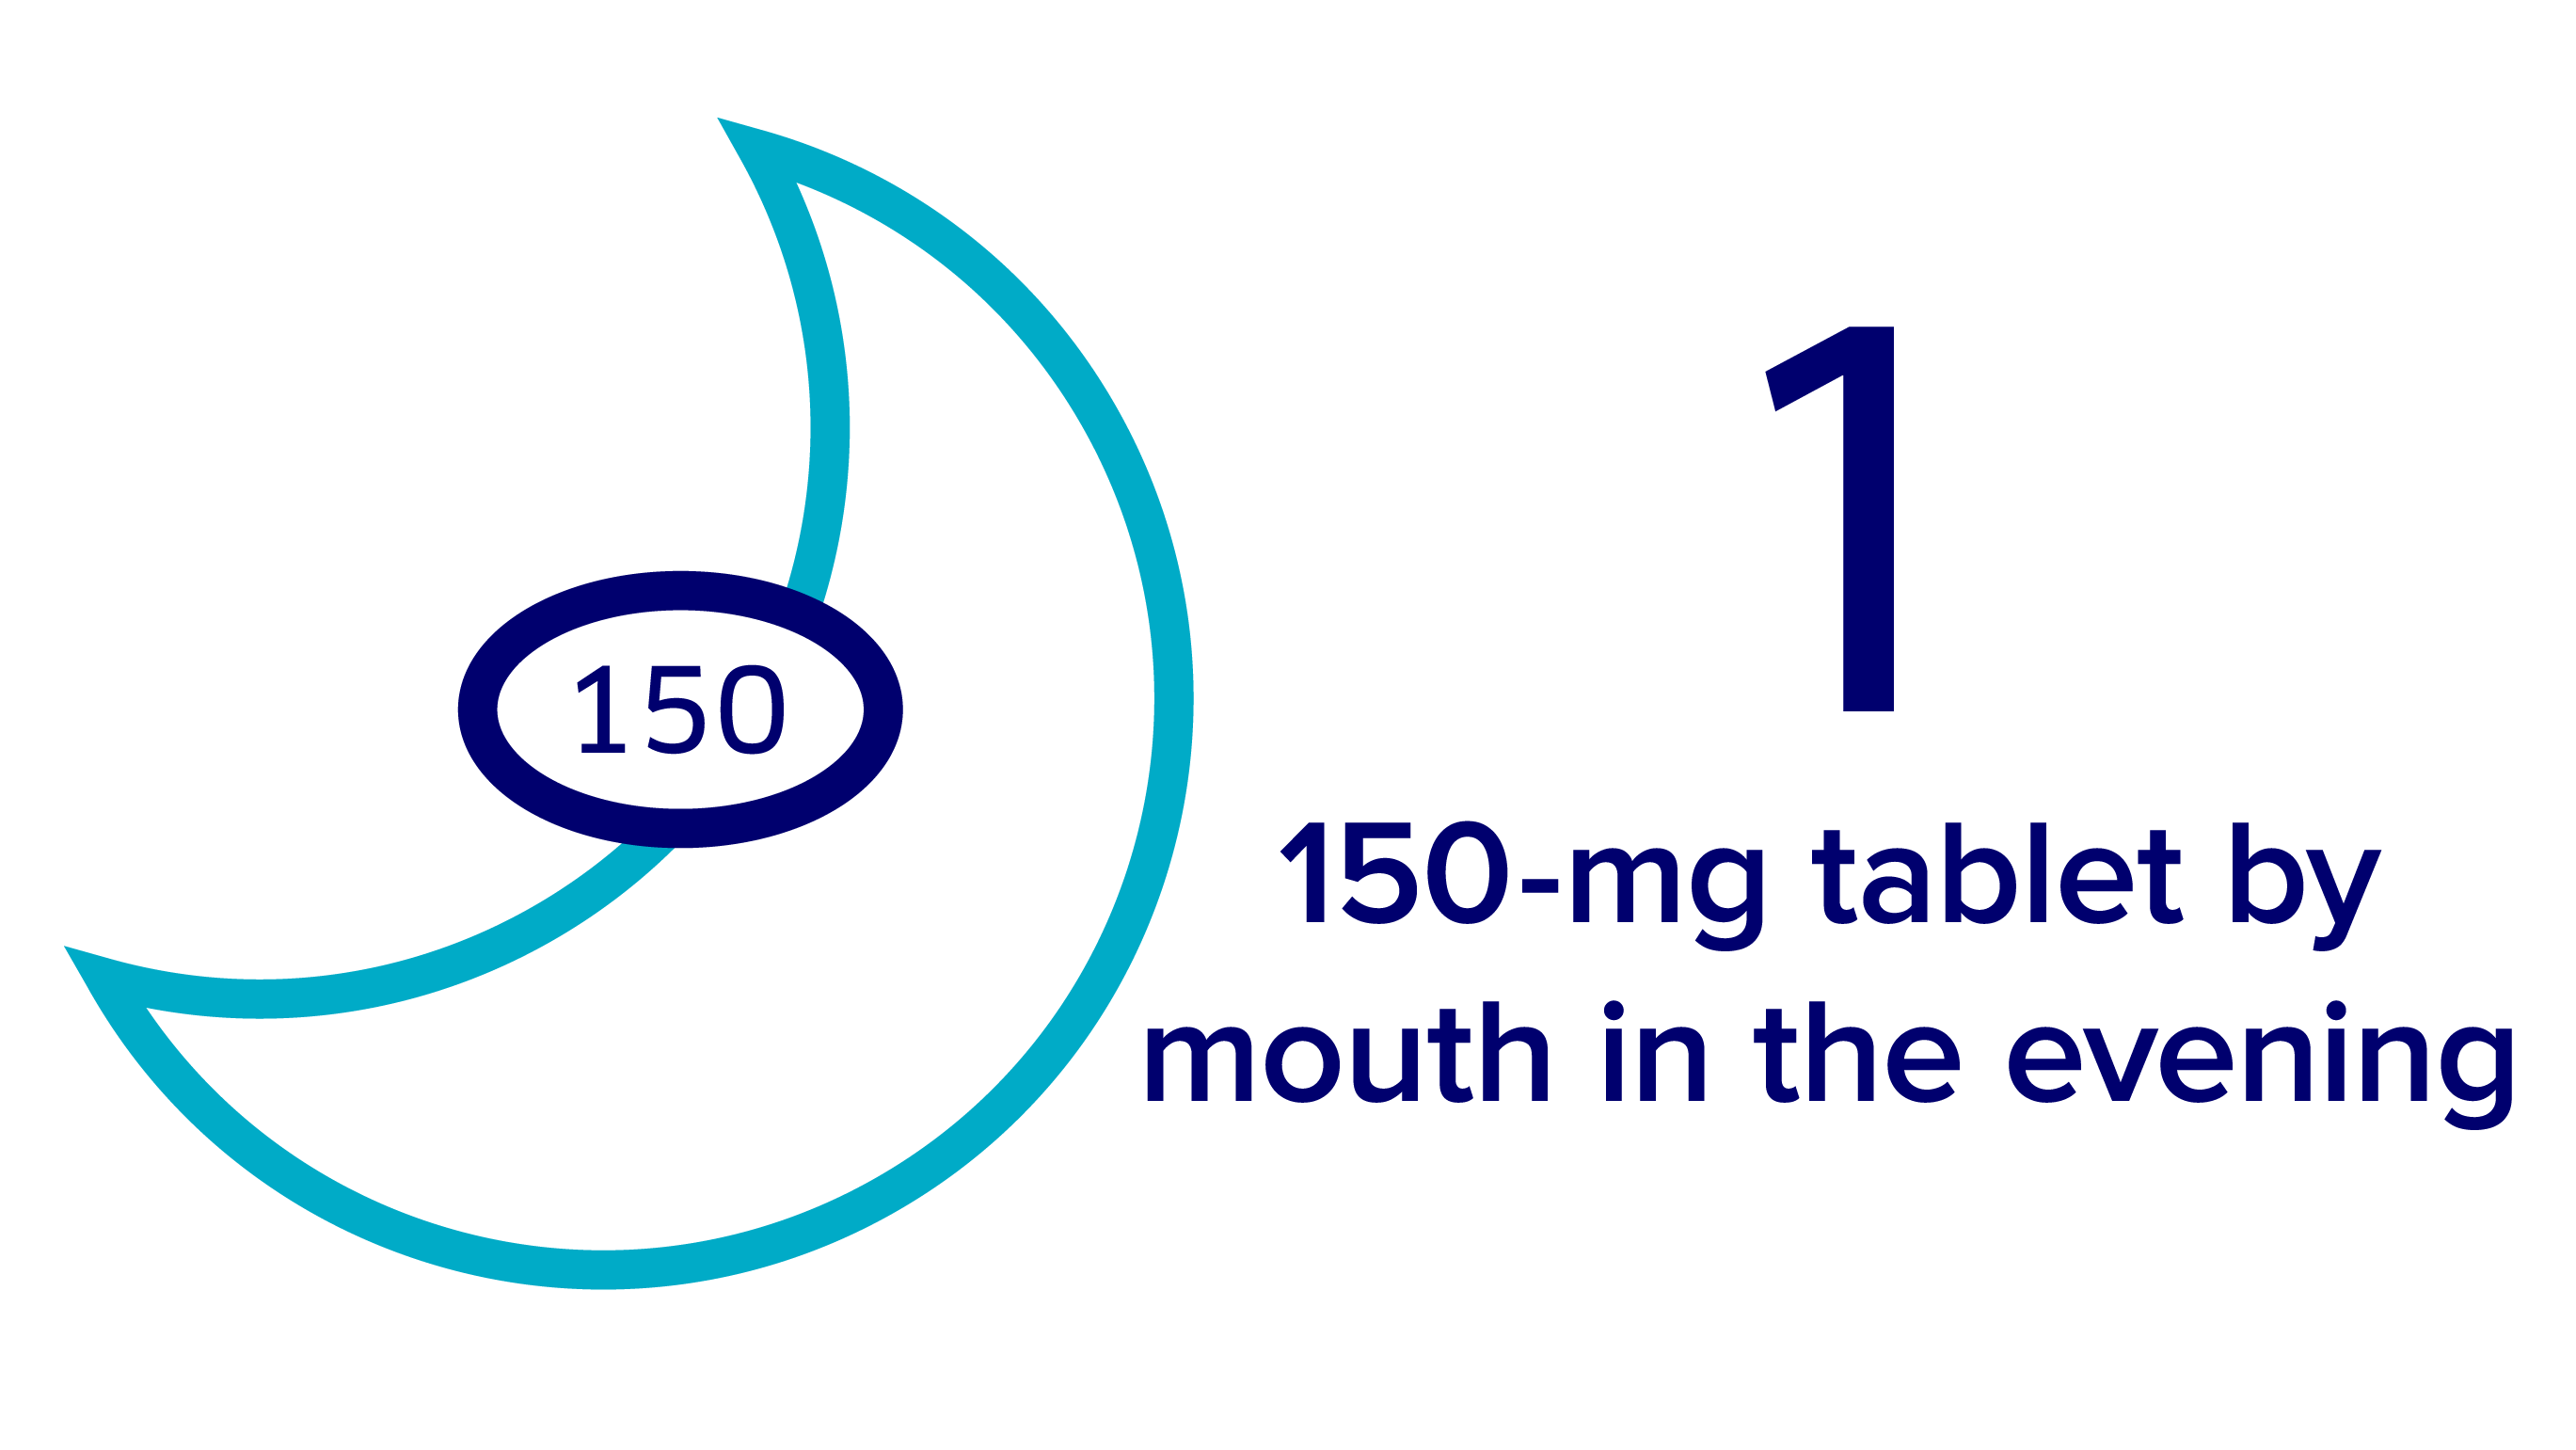 150-mg tablet by mouth in the evening